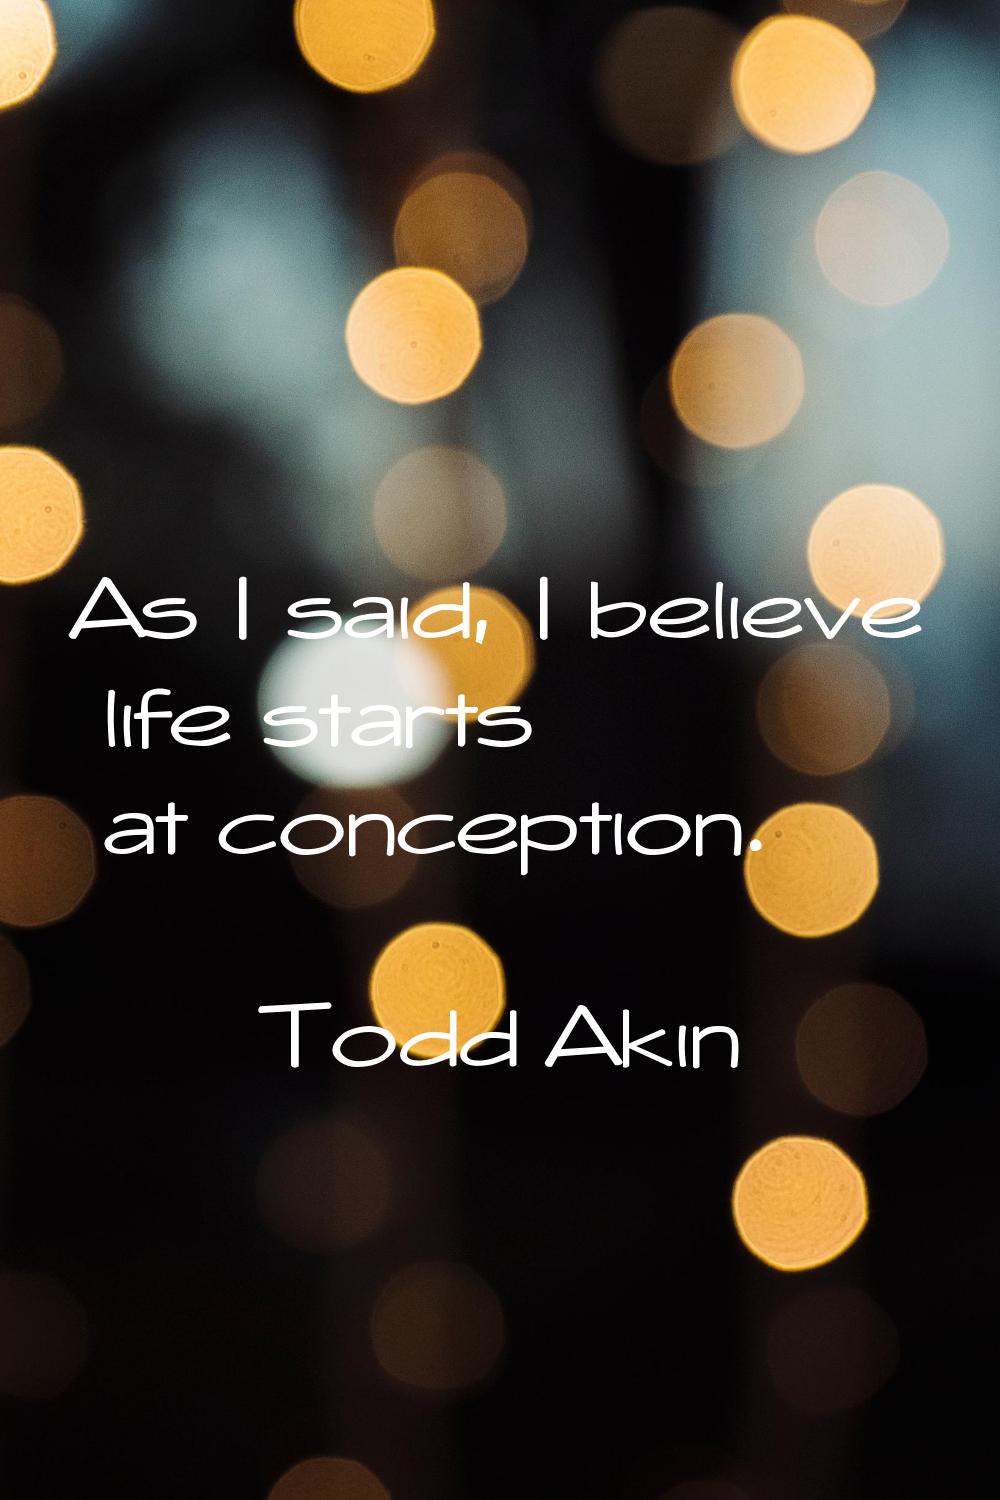 As I said, I believe life starts at conception.